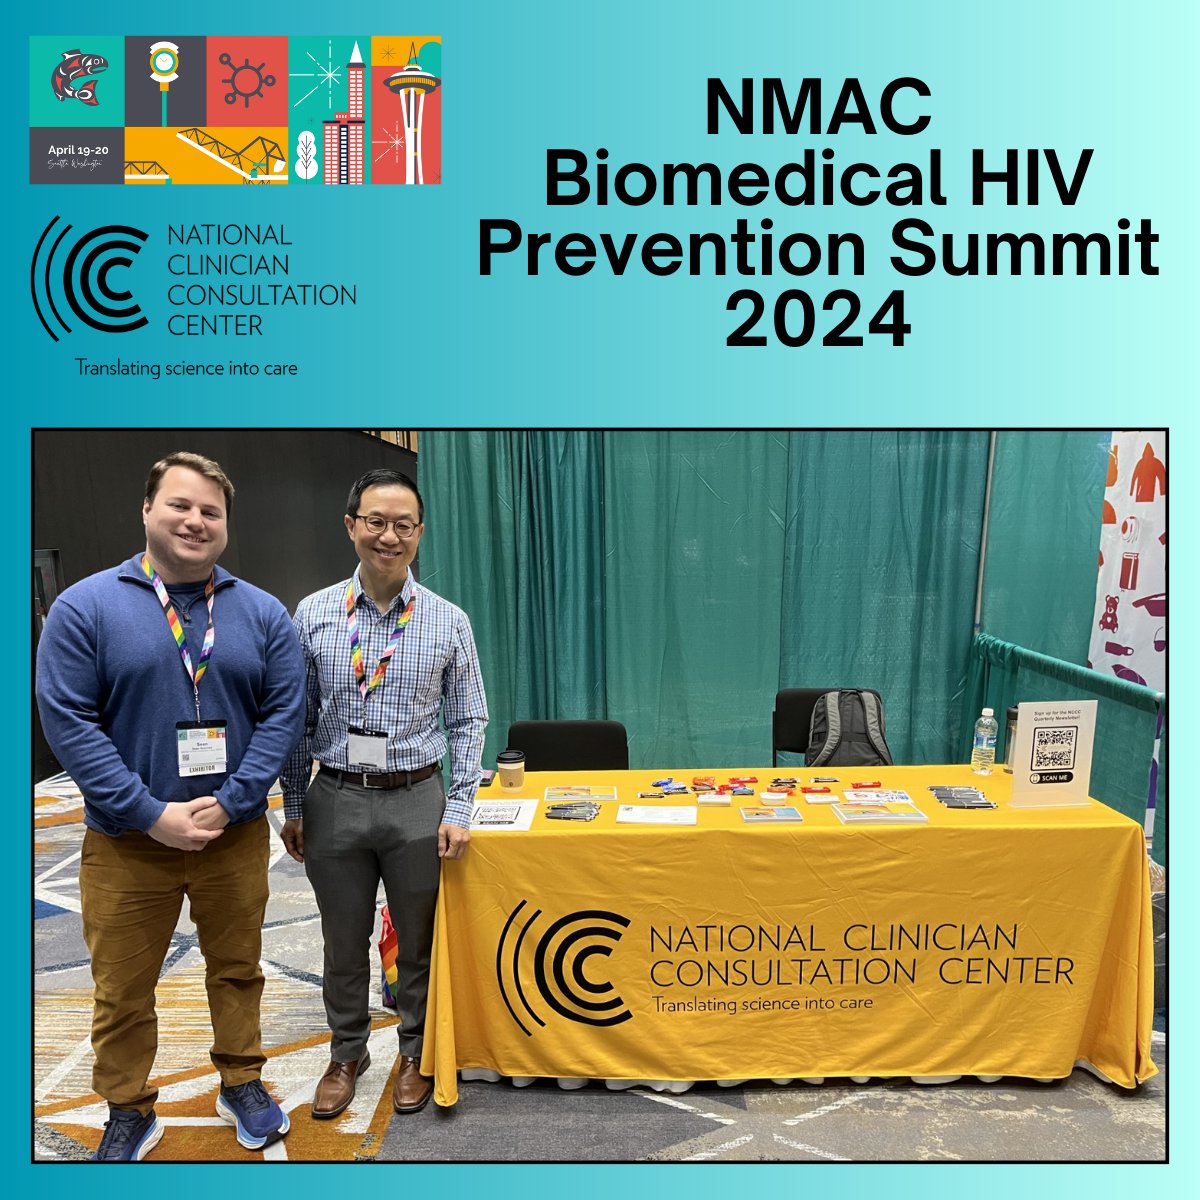 We're here in Seattle for the @NMACCommunity Biomedical HIV Prevention Summit 2024! Stop by the Exhibitor Hall, booth 214, for information about our services (and candy!) #BeElite #NMAC #HIVPrevention #MedicalConference